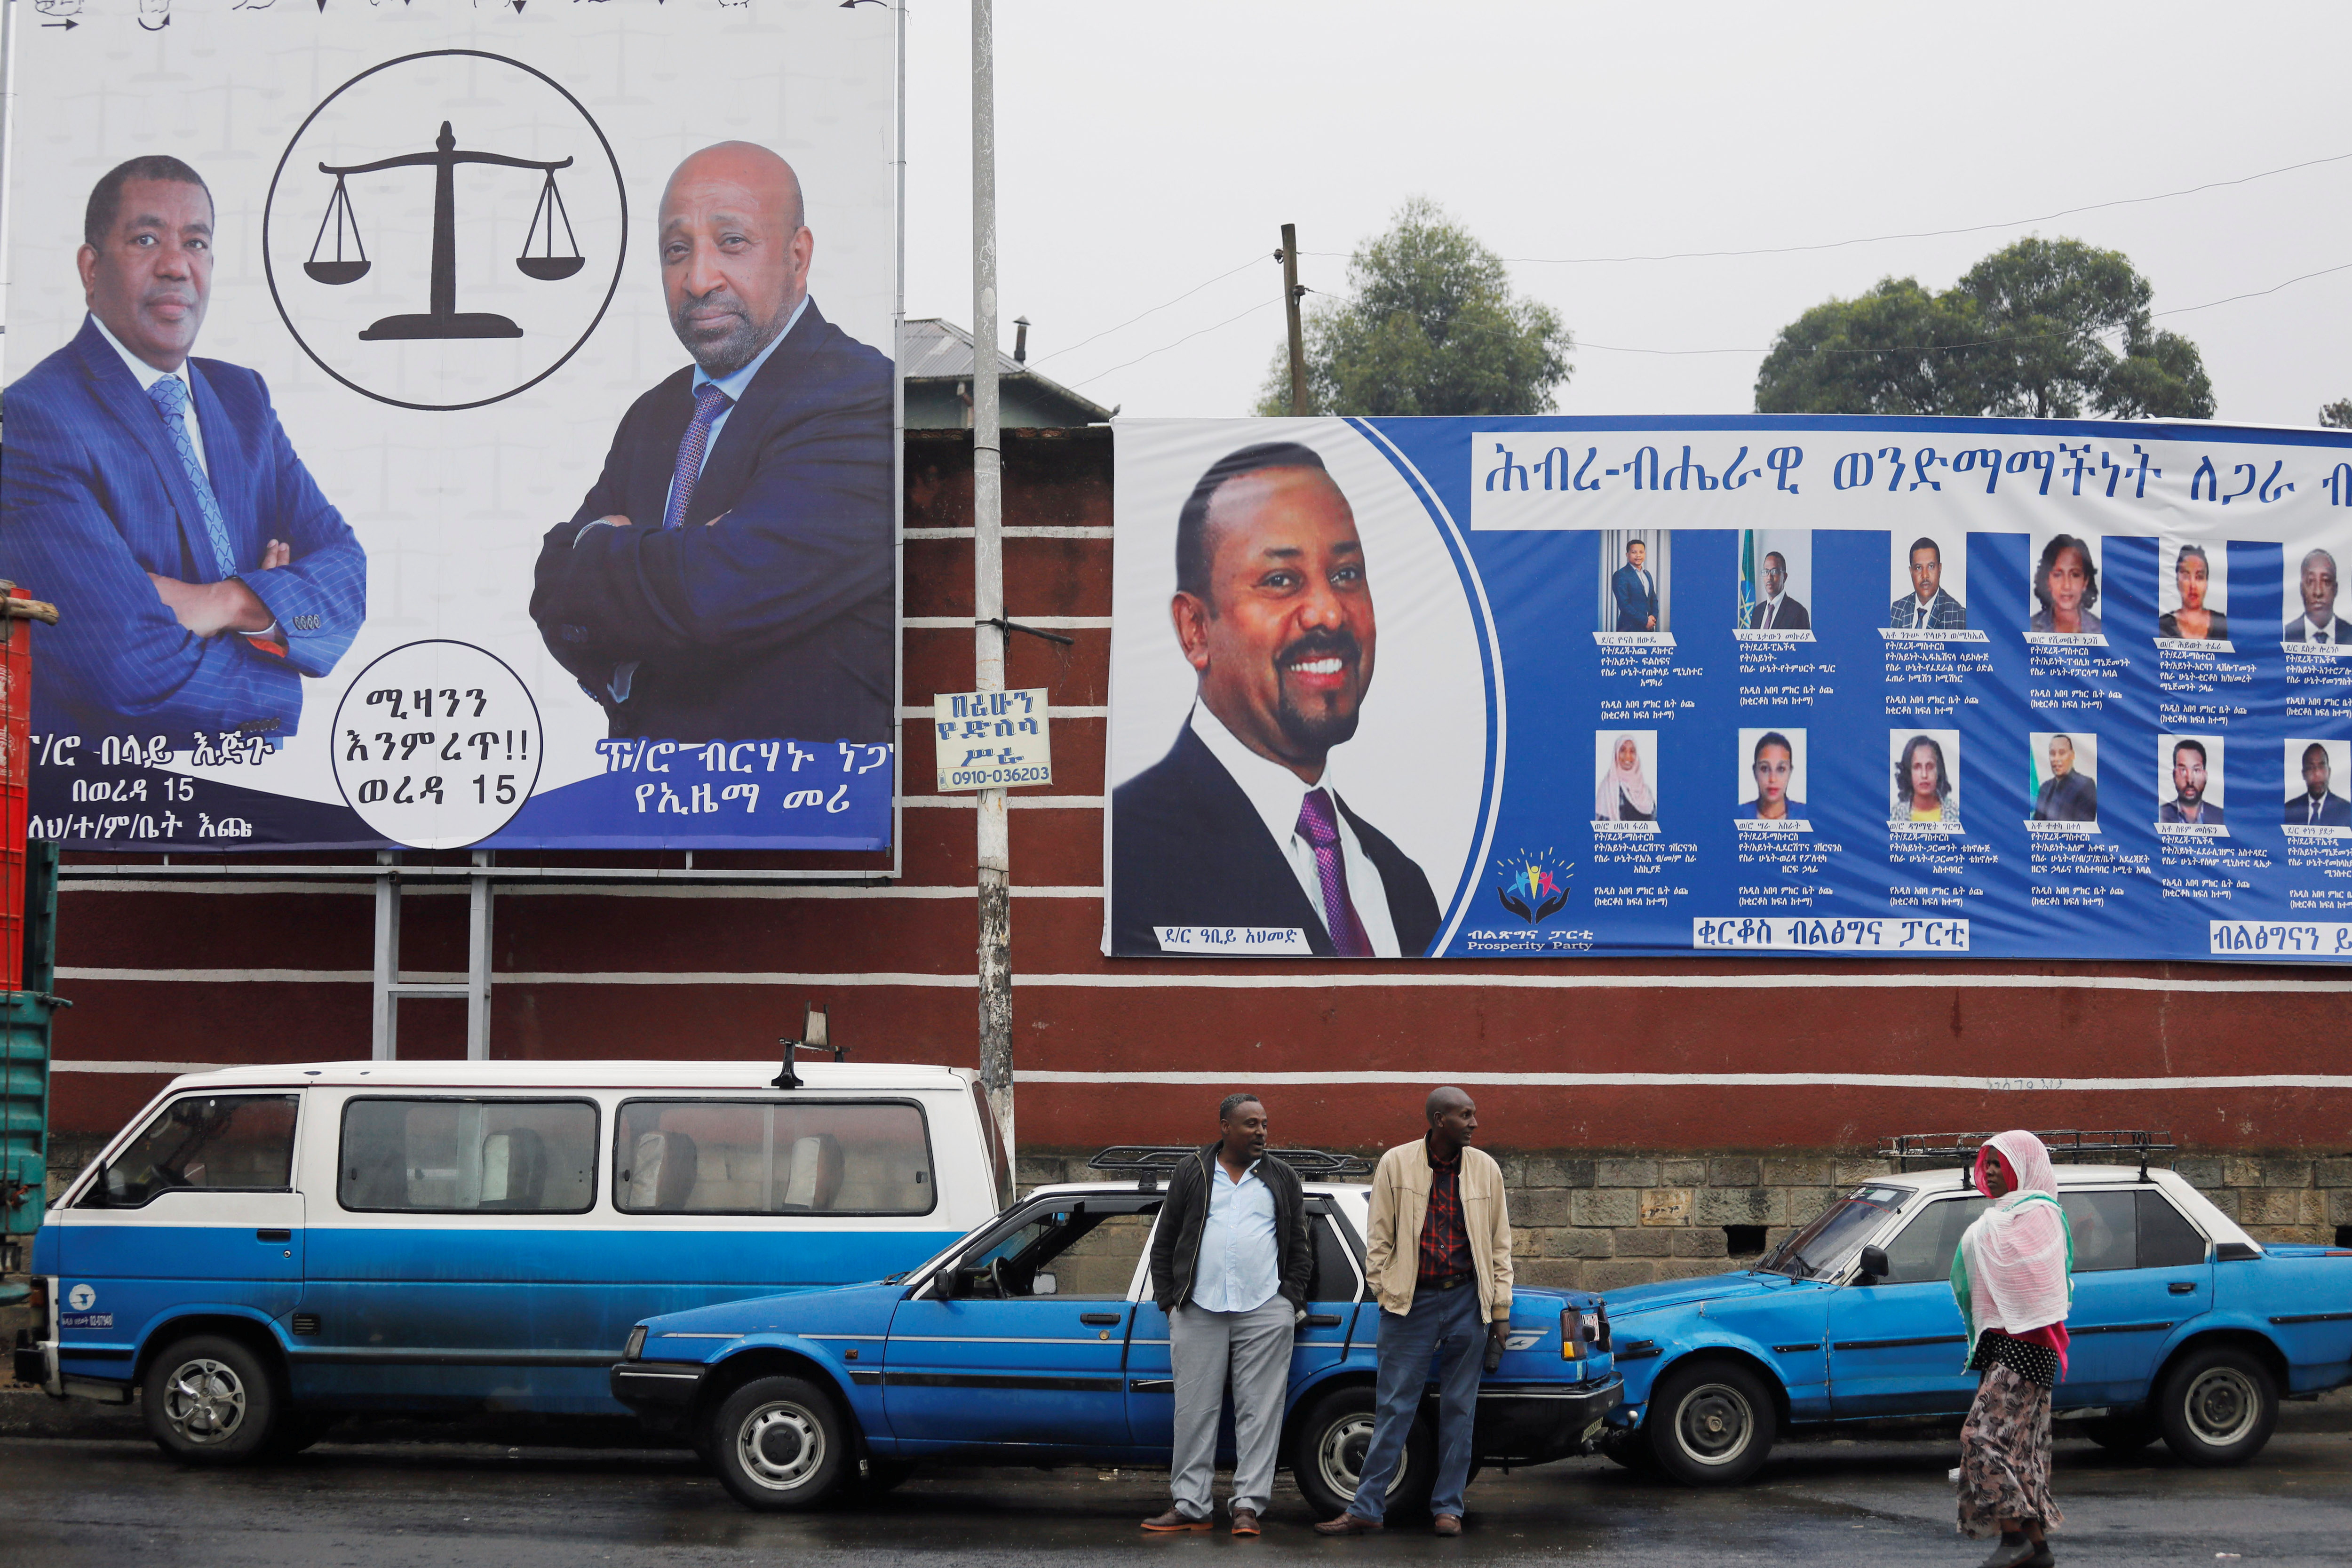 Taxi drivers stand in front of campaign banners ahead of Ethiopia's parliamentary and regional elections in Addis Ababa